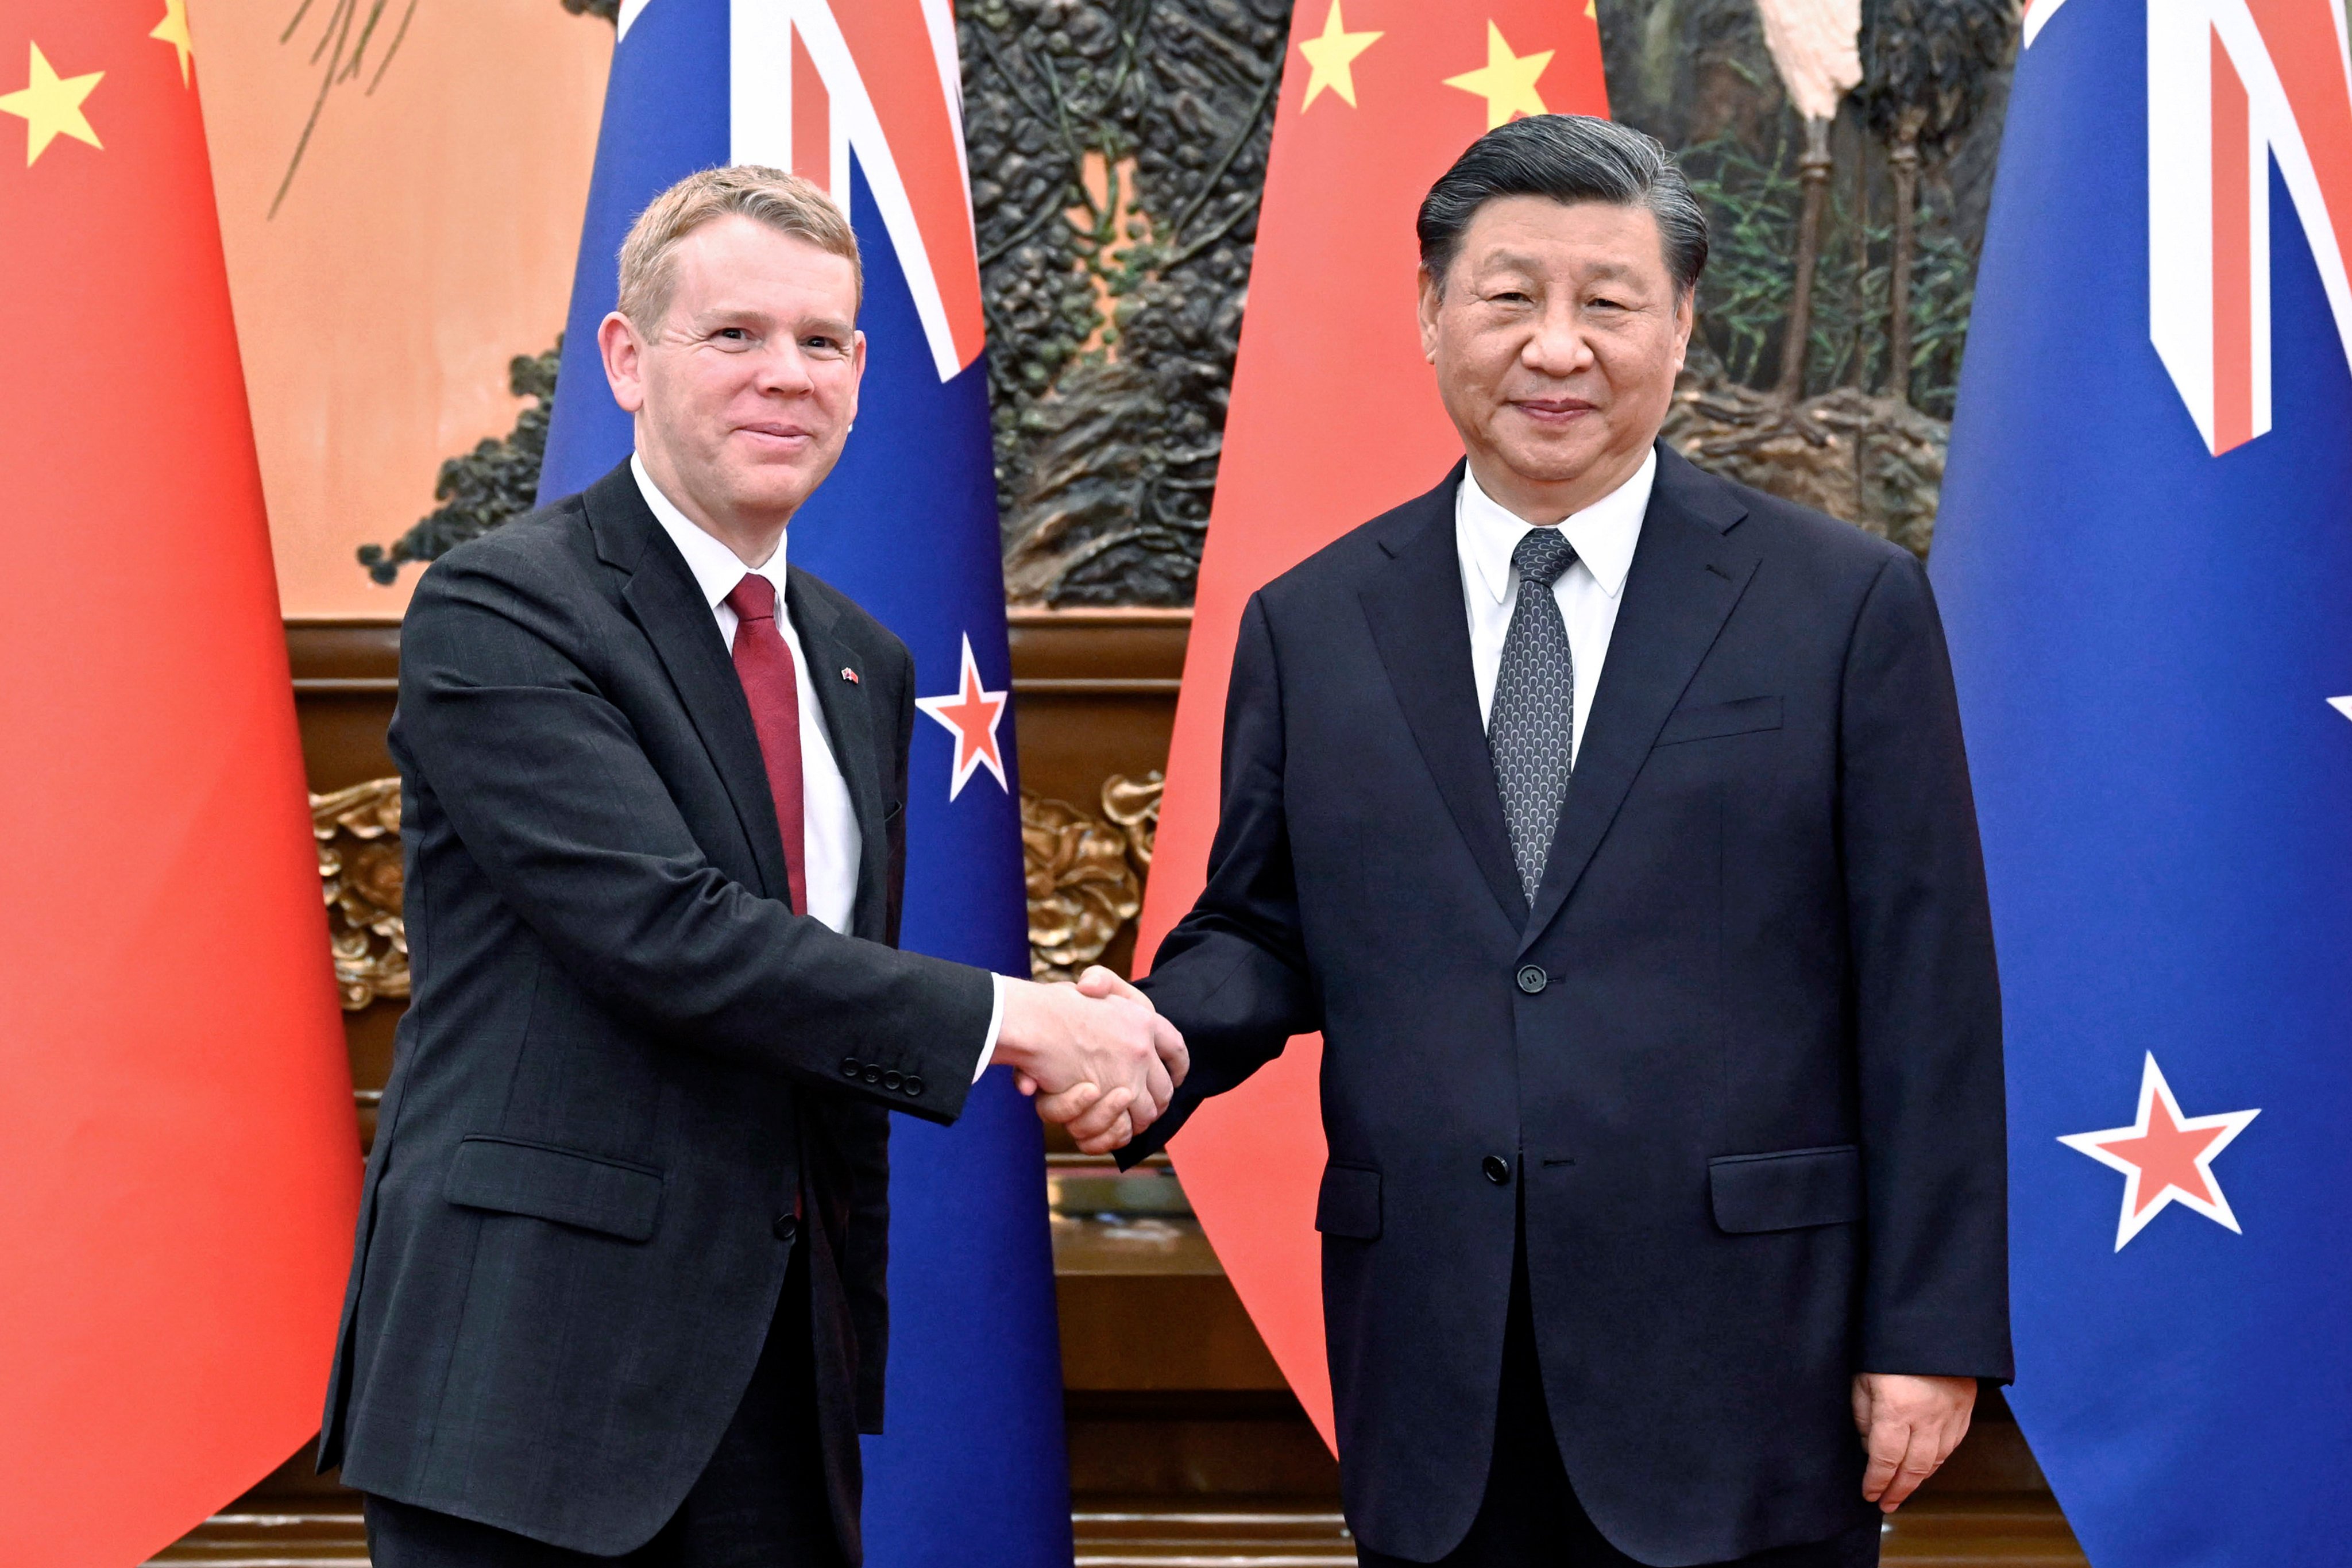 In Beijing, New Zealand Prime Minister Chris Hipkins met President Xi Jinping and signed a raft of trade agreements. Photo: via AP